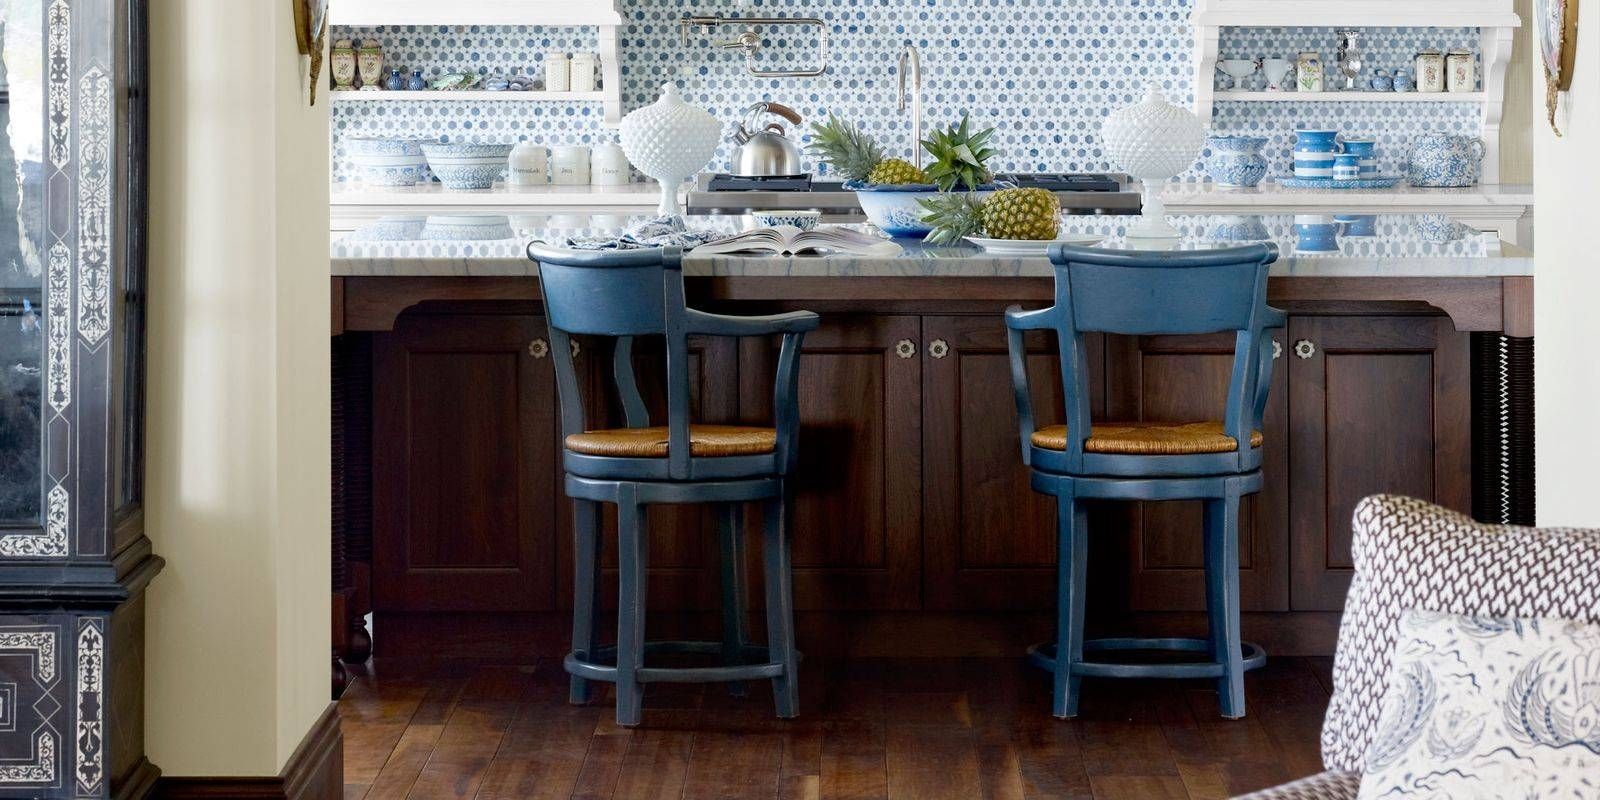 Blue Exotic Kitchen – House Beautiful Pinterest Favorite Pins July With Blue Mercury Glass Pendant Lights (View 13 of 15)